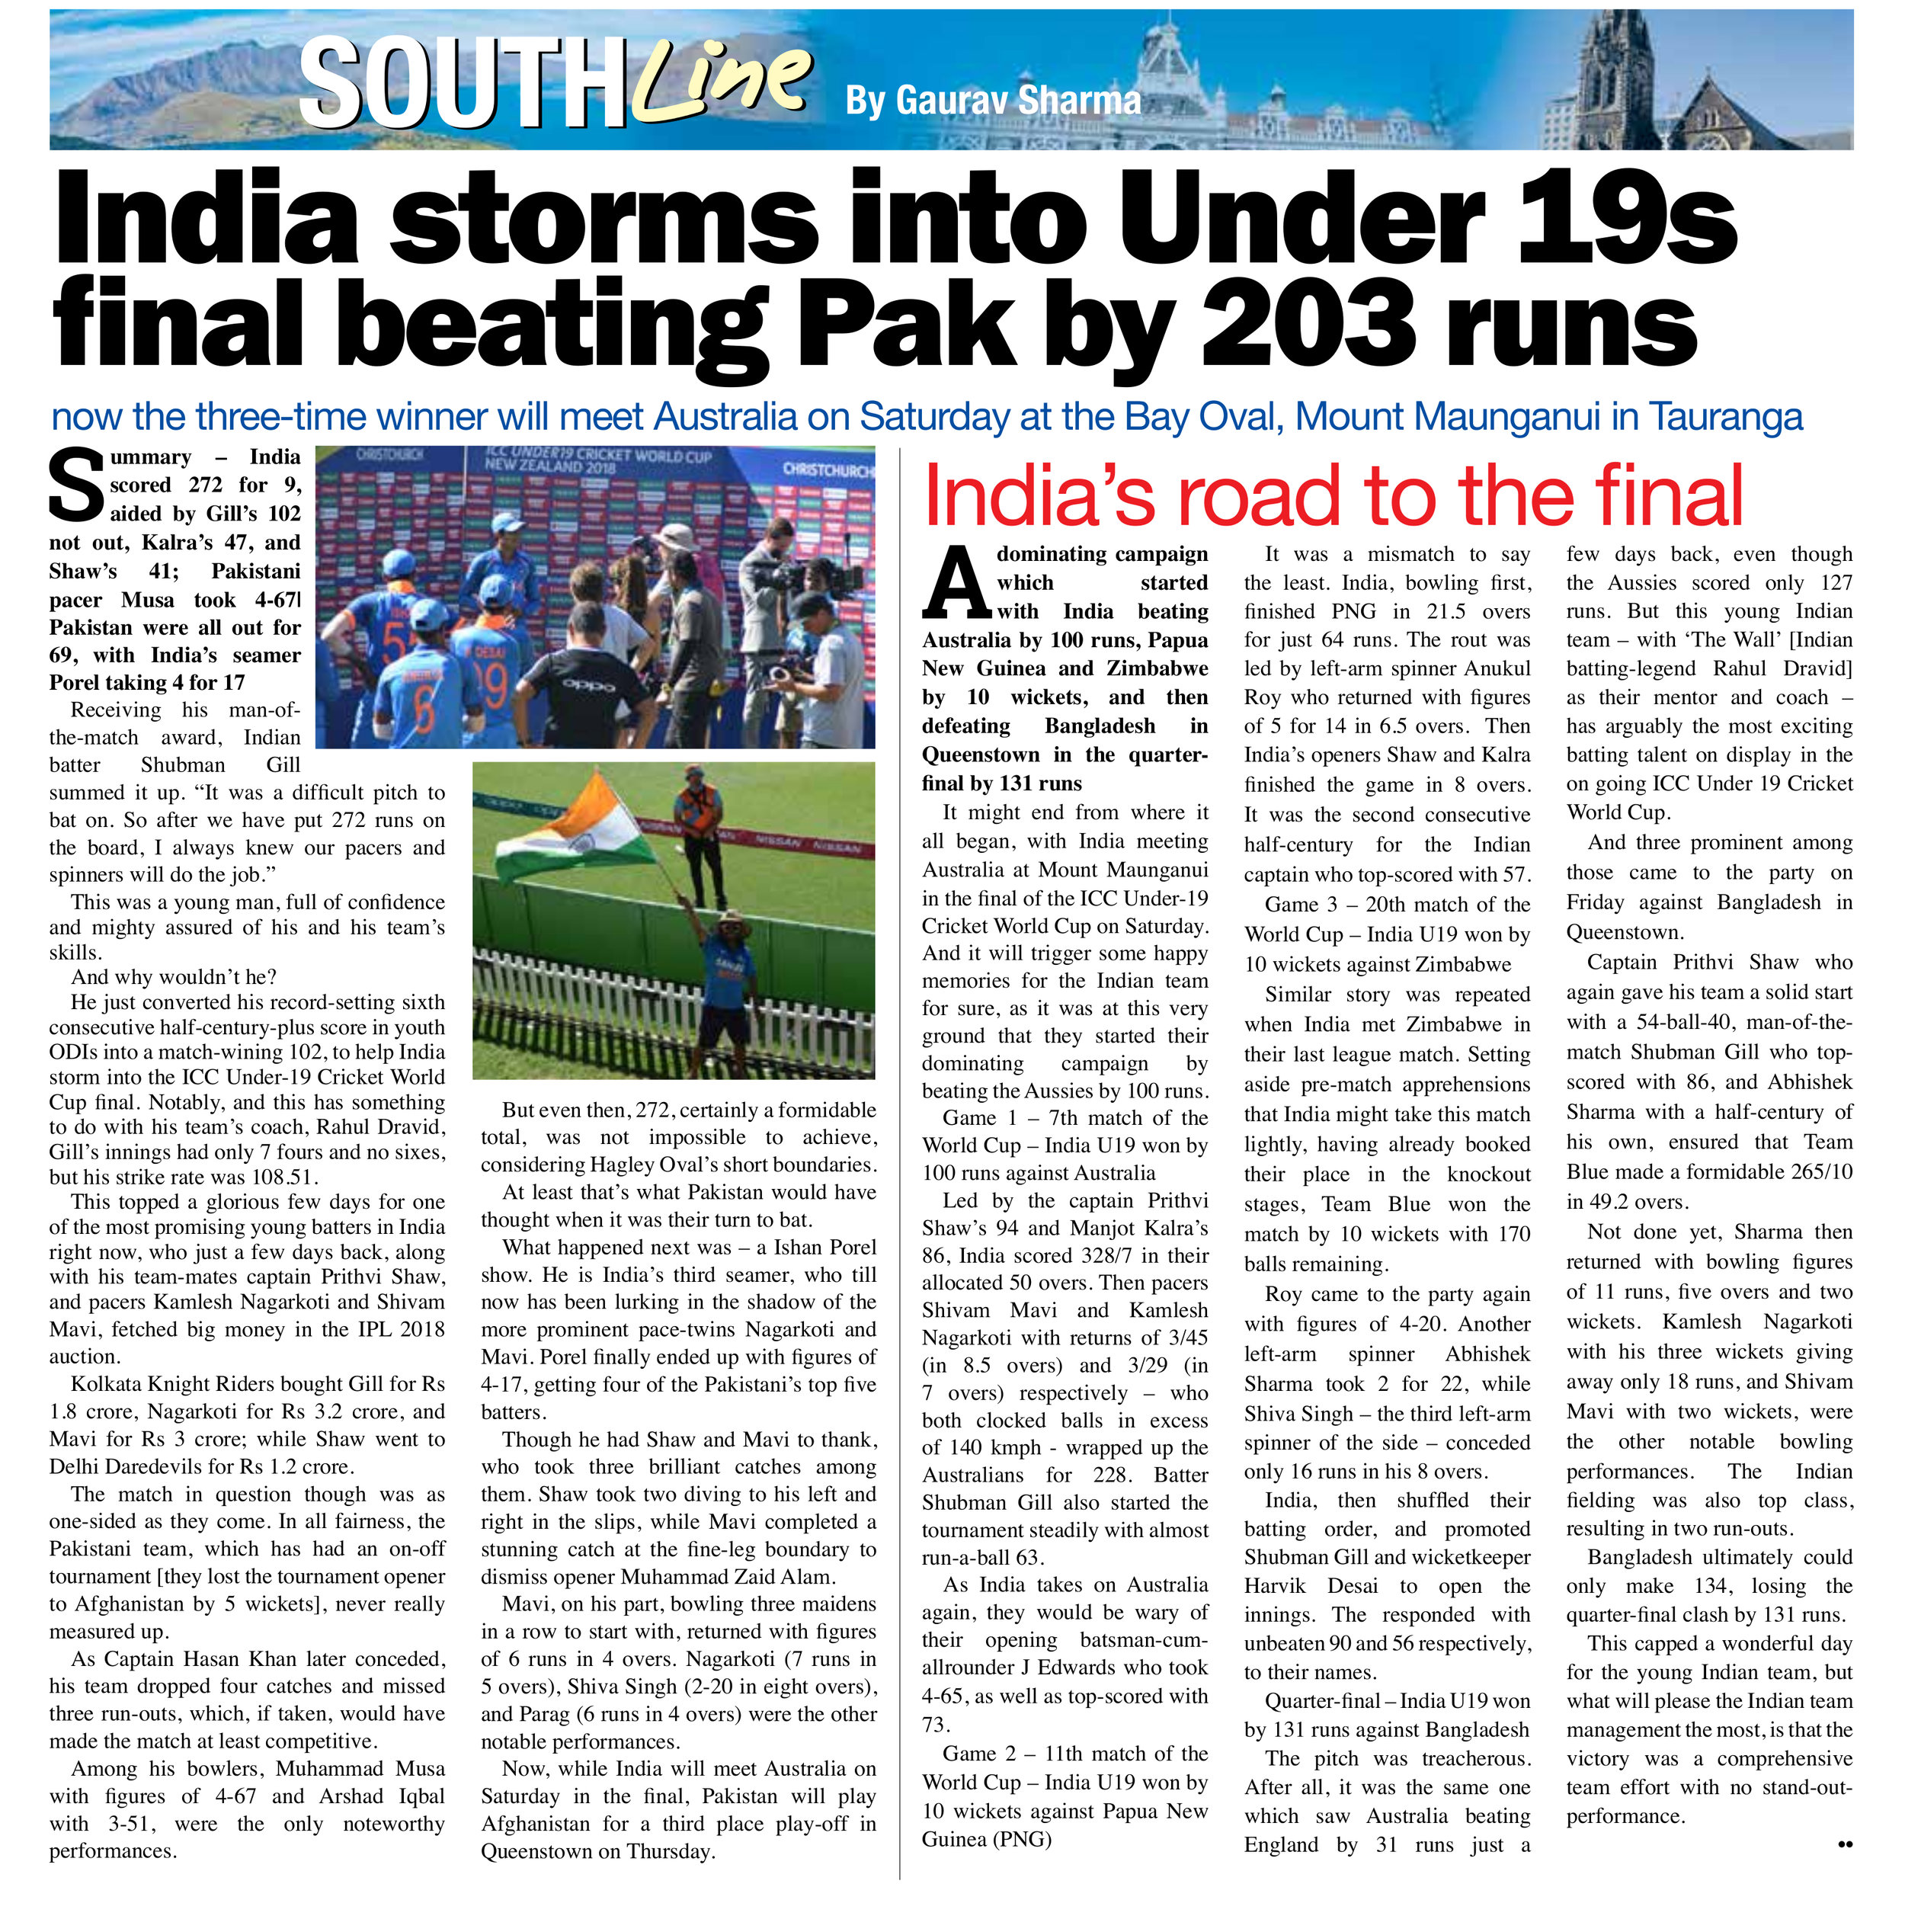 India storms into the Under19s final beating Pak by 203 runs — NewZzit The Expat Eye on Aotearoa